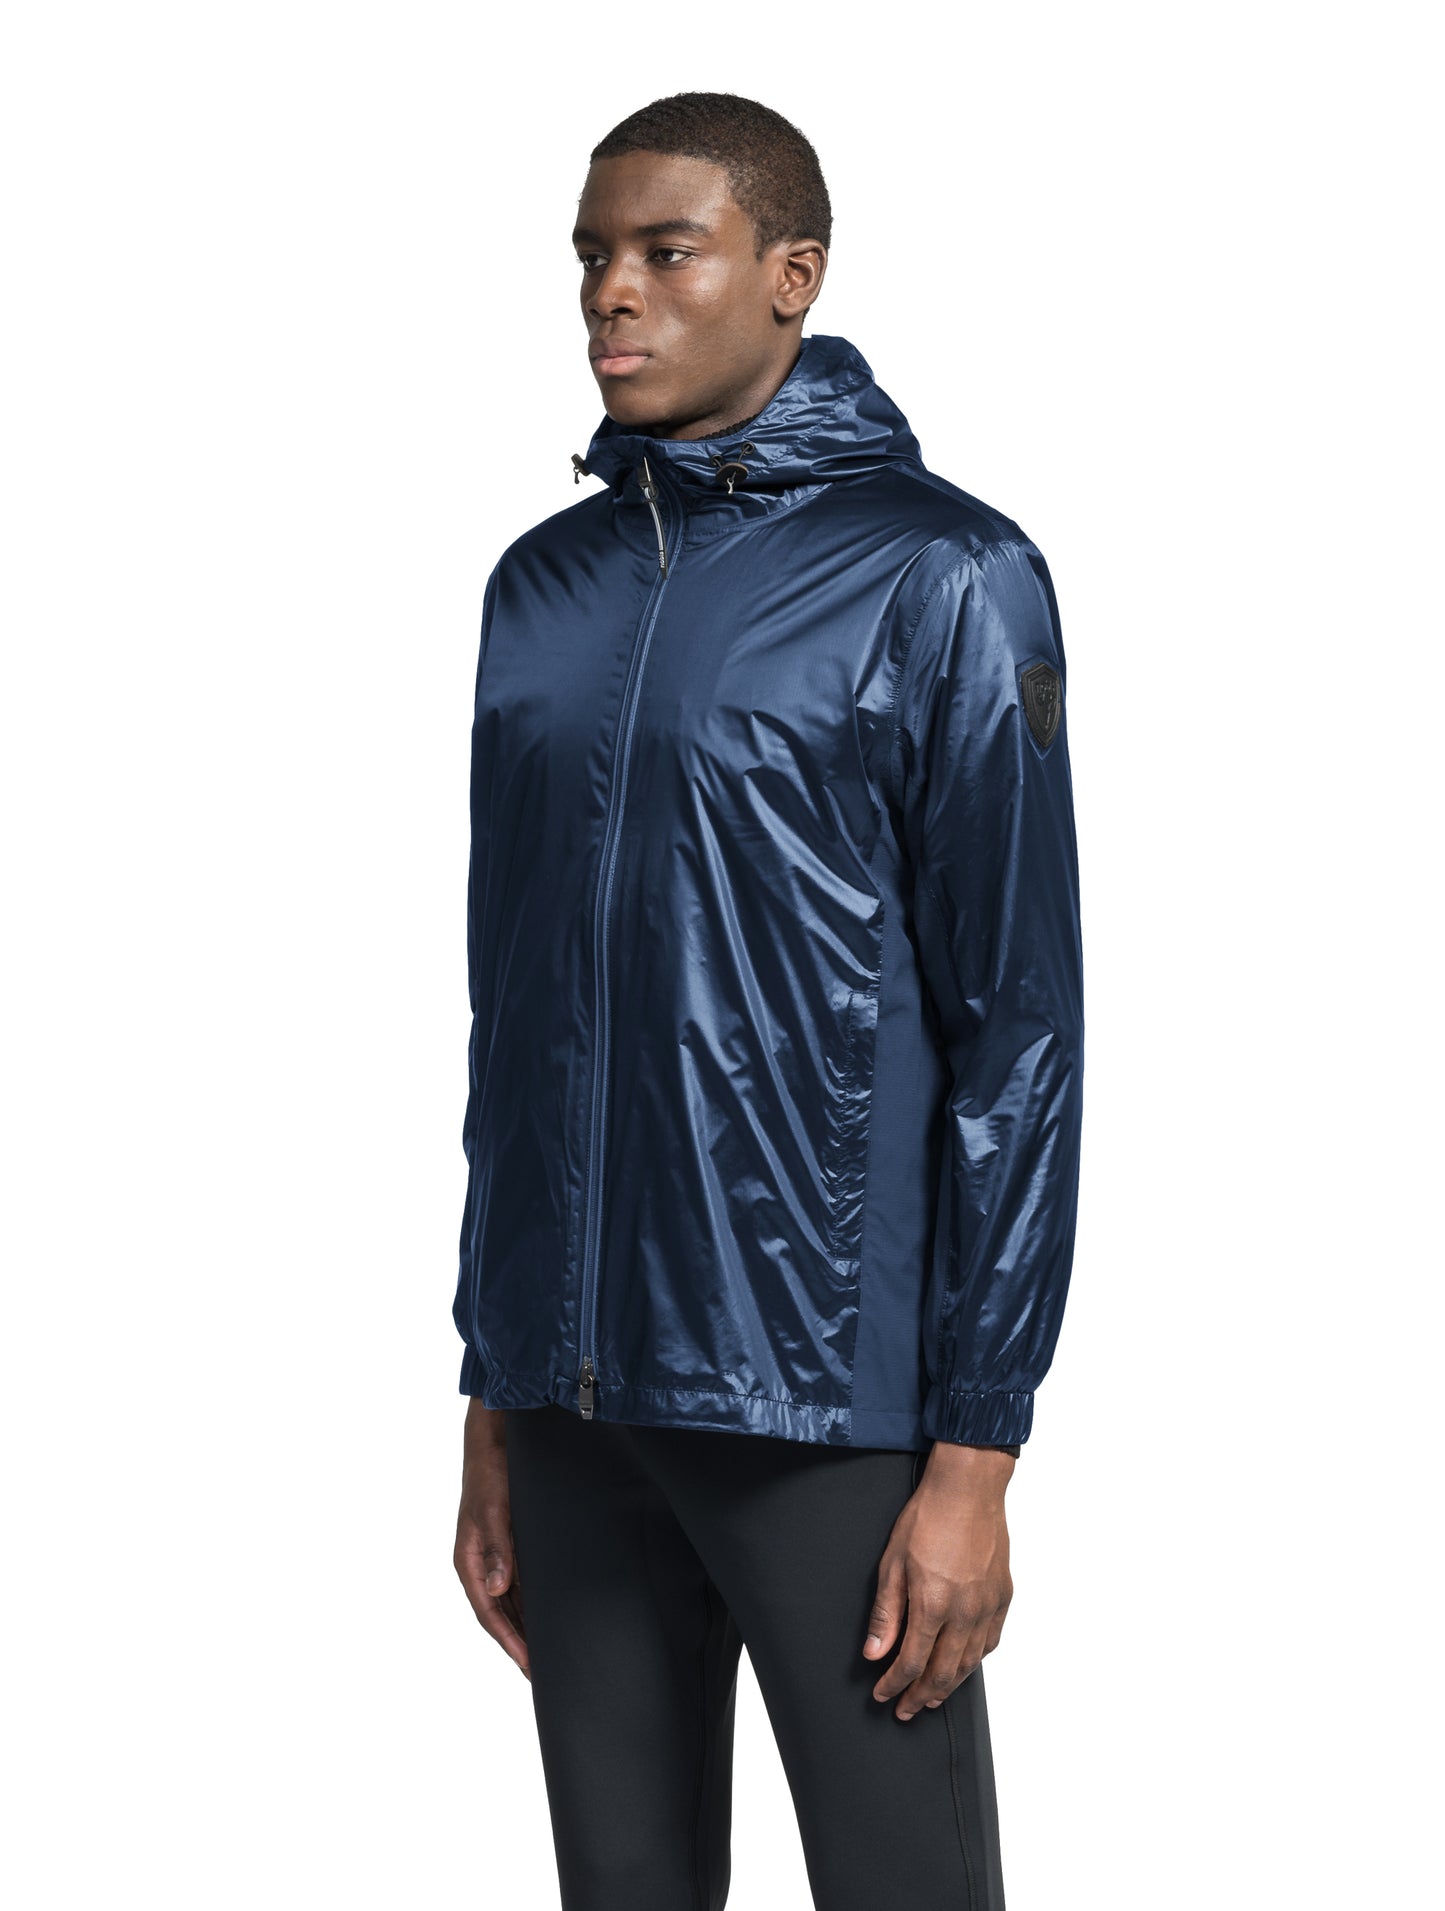 Stratus Men's Tailored Packable Rain Jacket in hip length, premium cire technical nylon taffeta and stretch ripstop fabrication, highly breathable mesh lining, hidden packable pocket, non-removable hood with adjustable draw cord, reflective piping along front and back, underarm grommets for extra breathability, back yoke with mesh ventilation, two waist zipper pockets, two interior zipper pockets, elastic cuffs with adjustable snap button, and adjustable interior draw cord at waist hem, in Marine